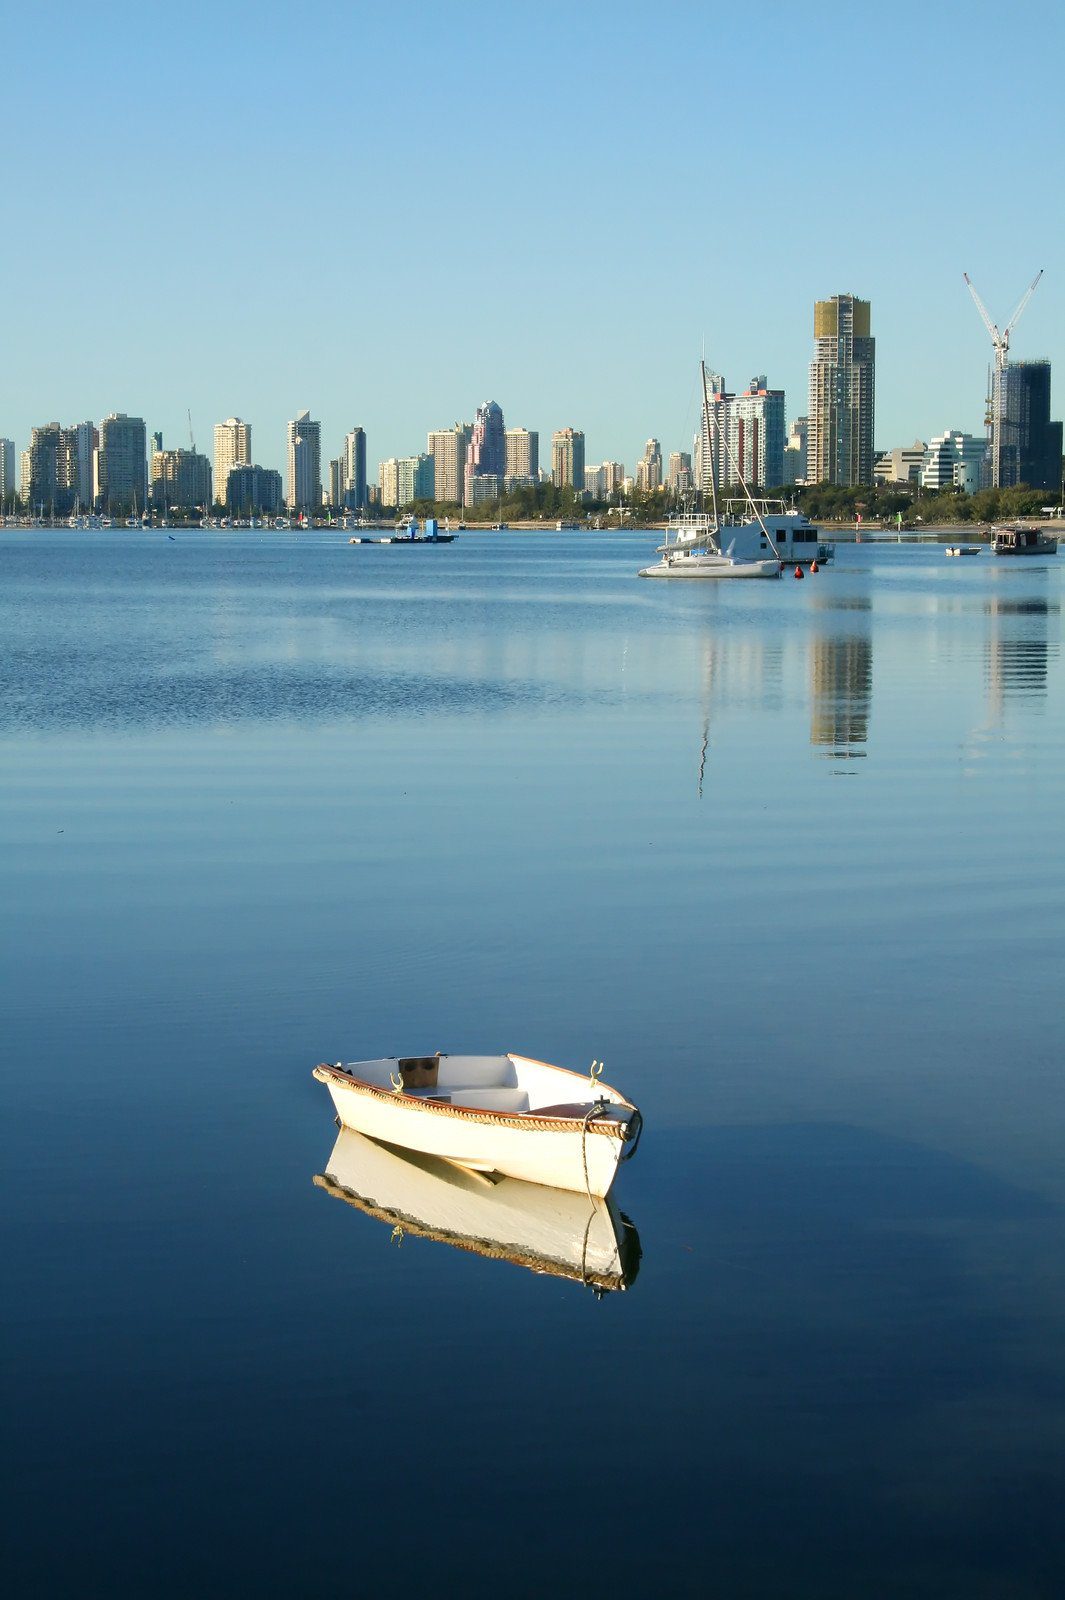 Looking at Surfers Paradise across the Broadwater, Gold Coast, Queensland Australia